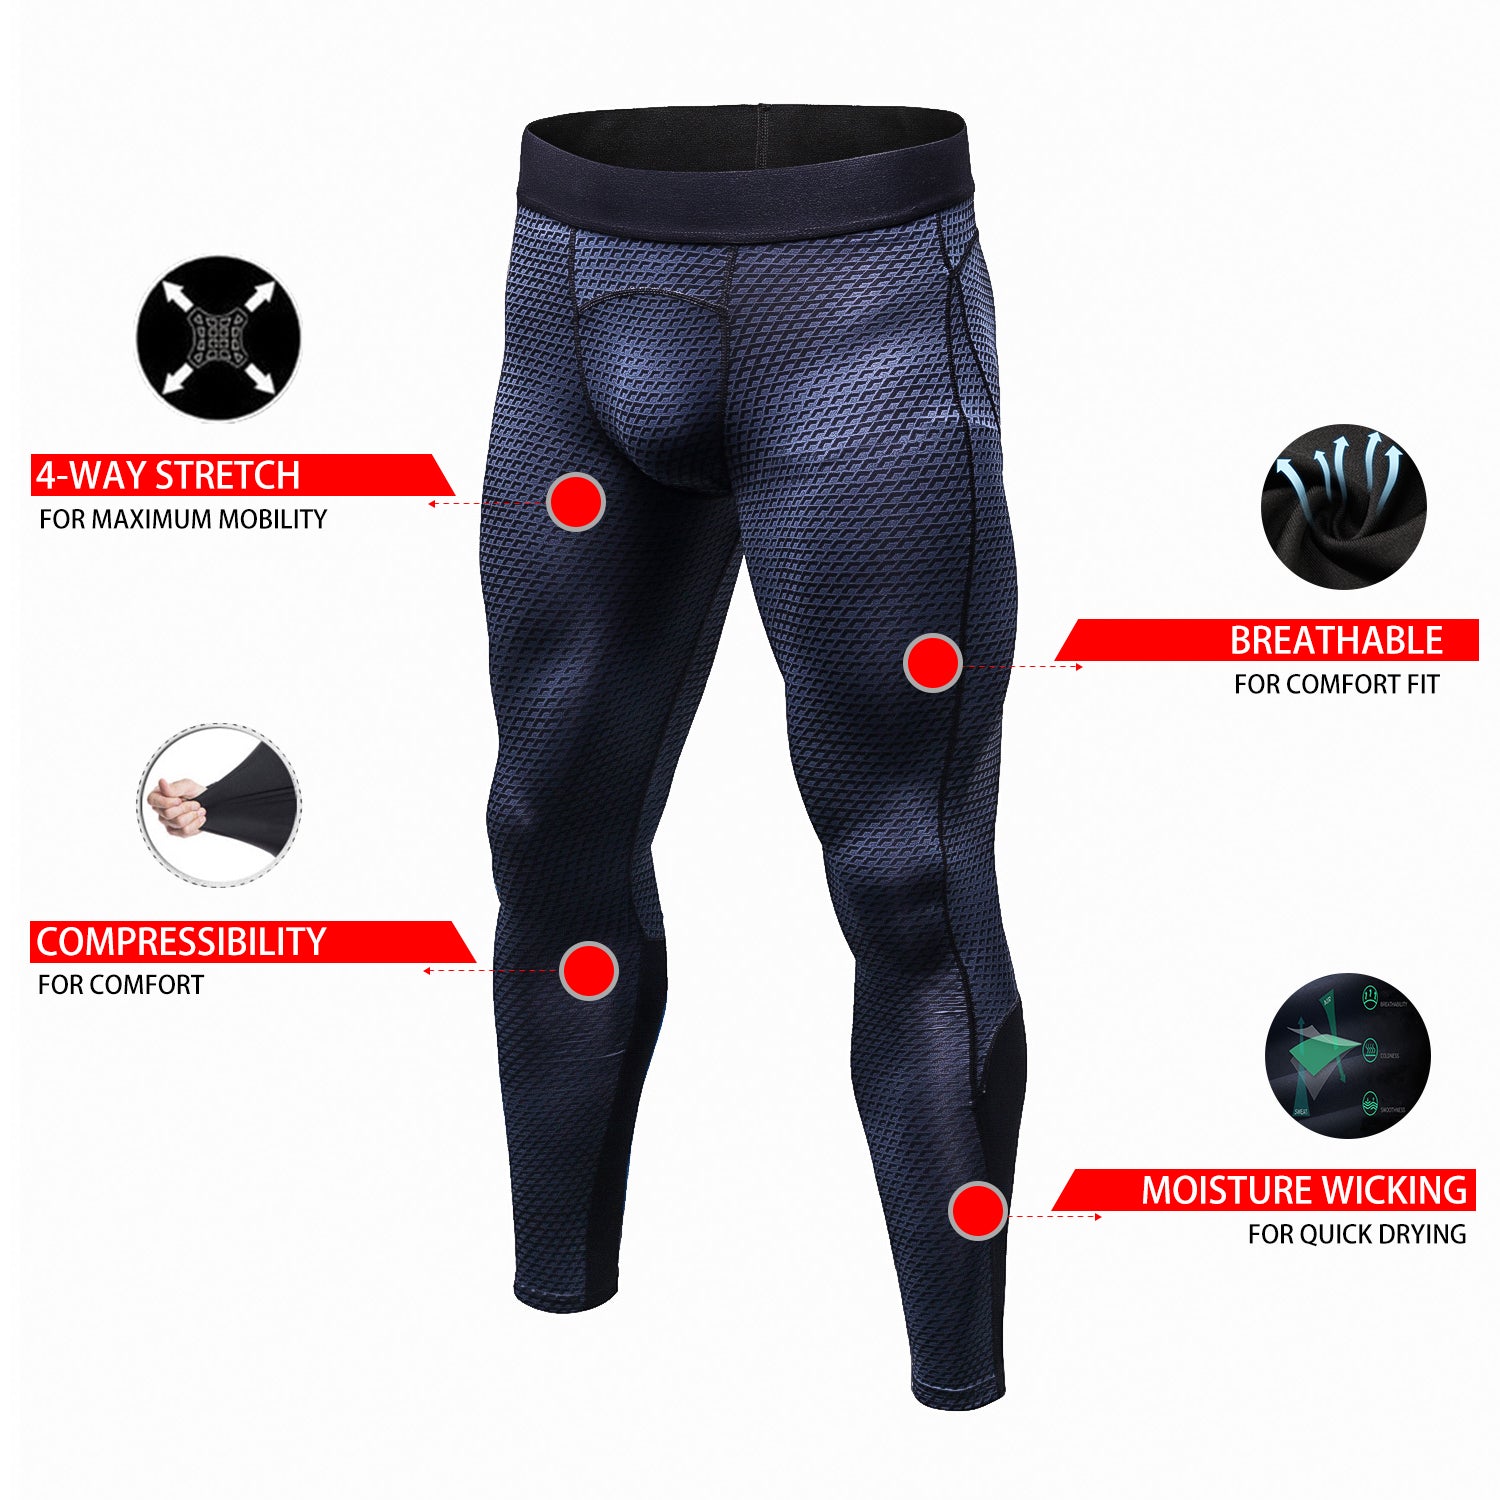 MEN'S BROOKS MOMENTUM THERMAL TIGHT | Performance Running Outfitters